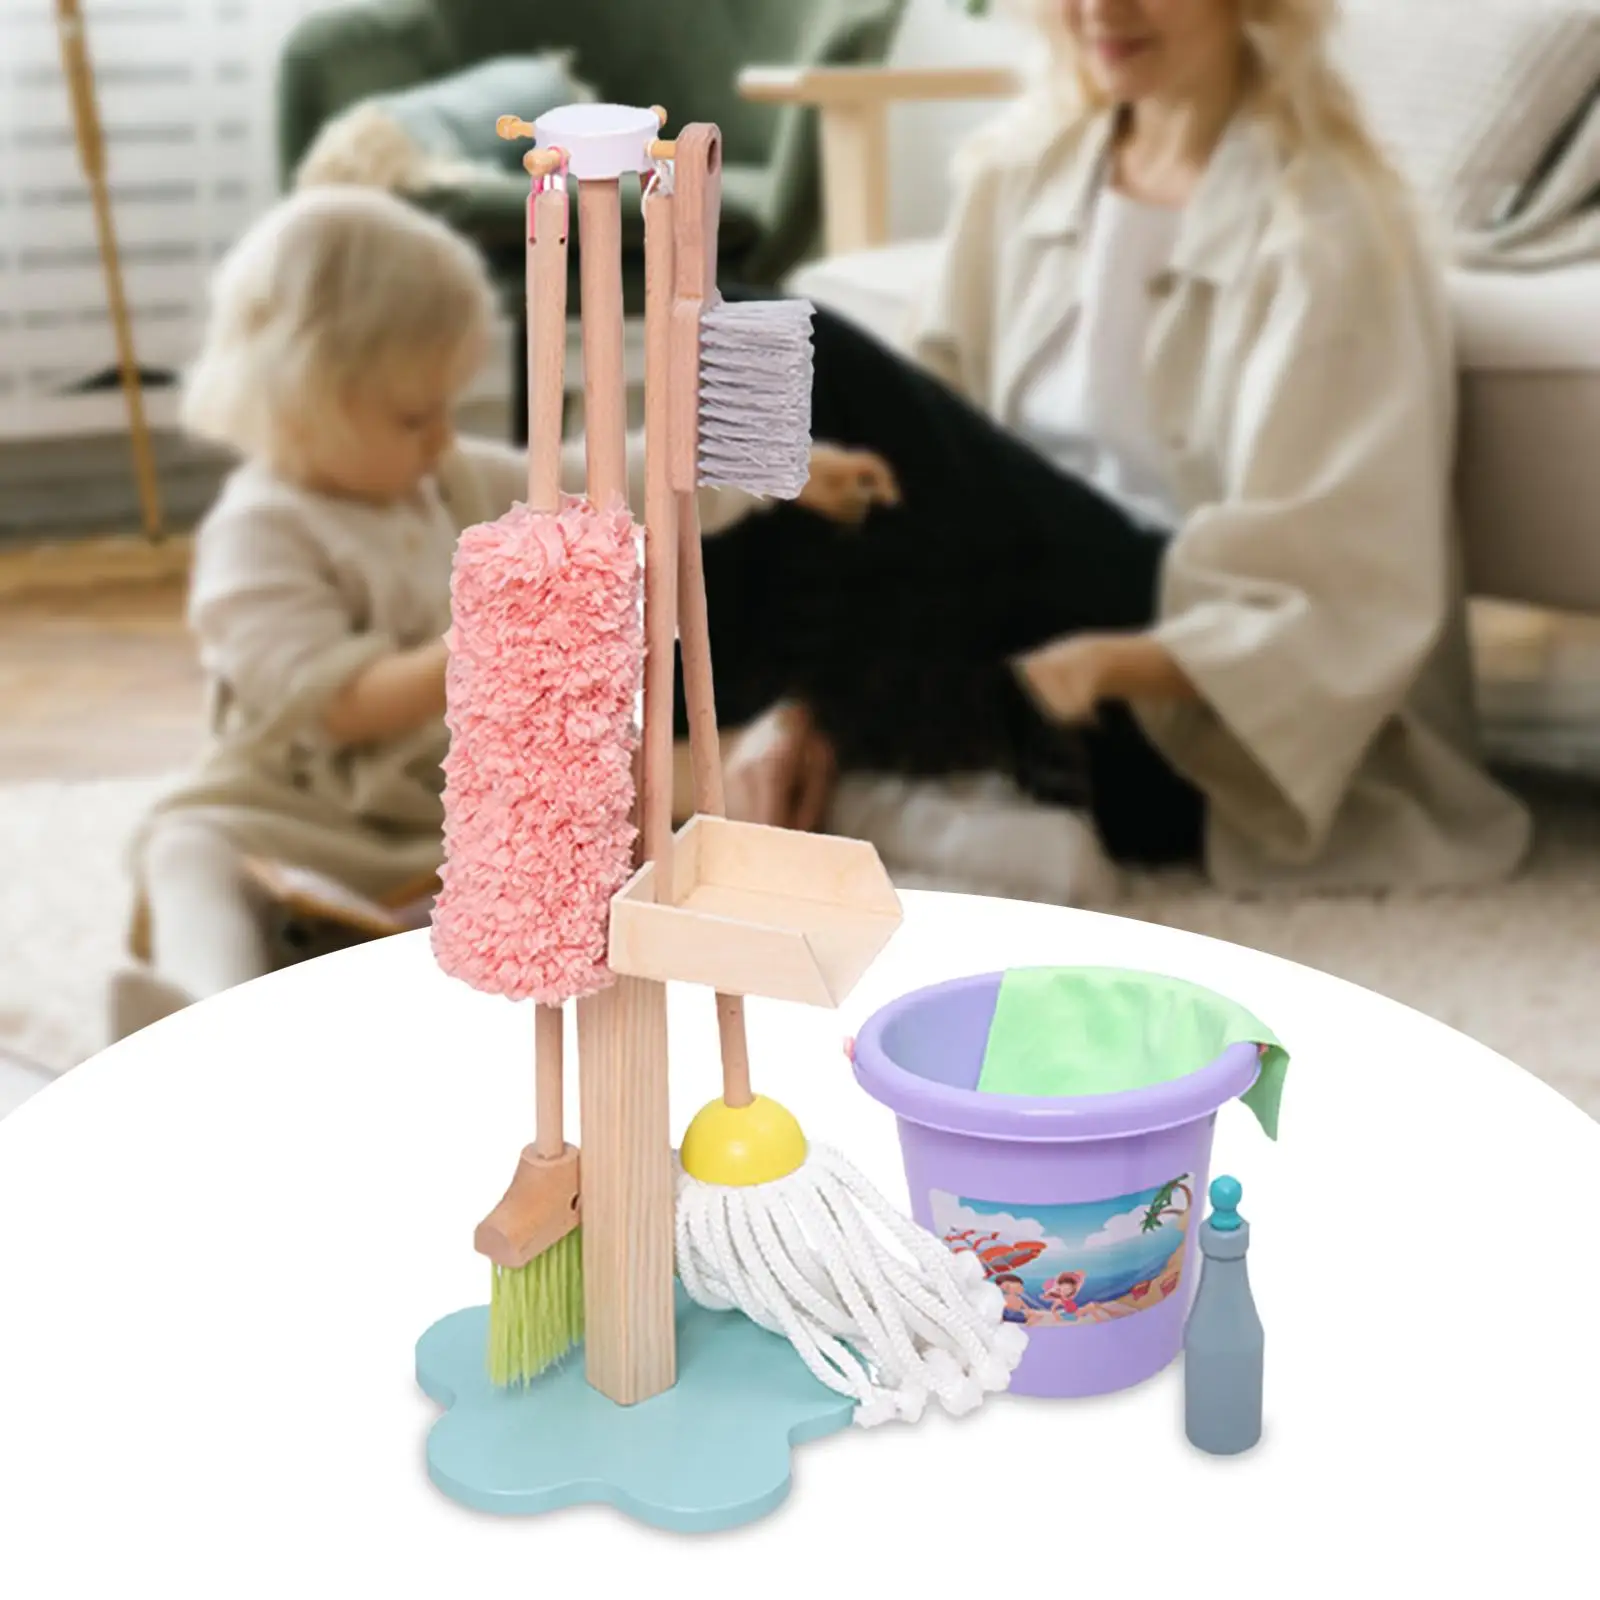 9 Pieces Simulation Children Cleaning Tools House Cleaning Toys Hanging Stand Brush Dustpan Pretend Play for Children Boys Gifts